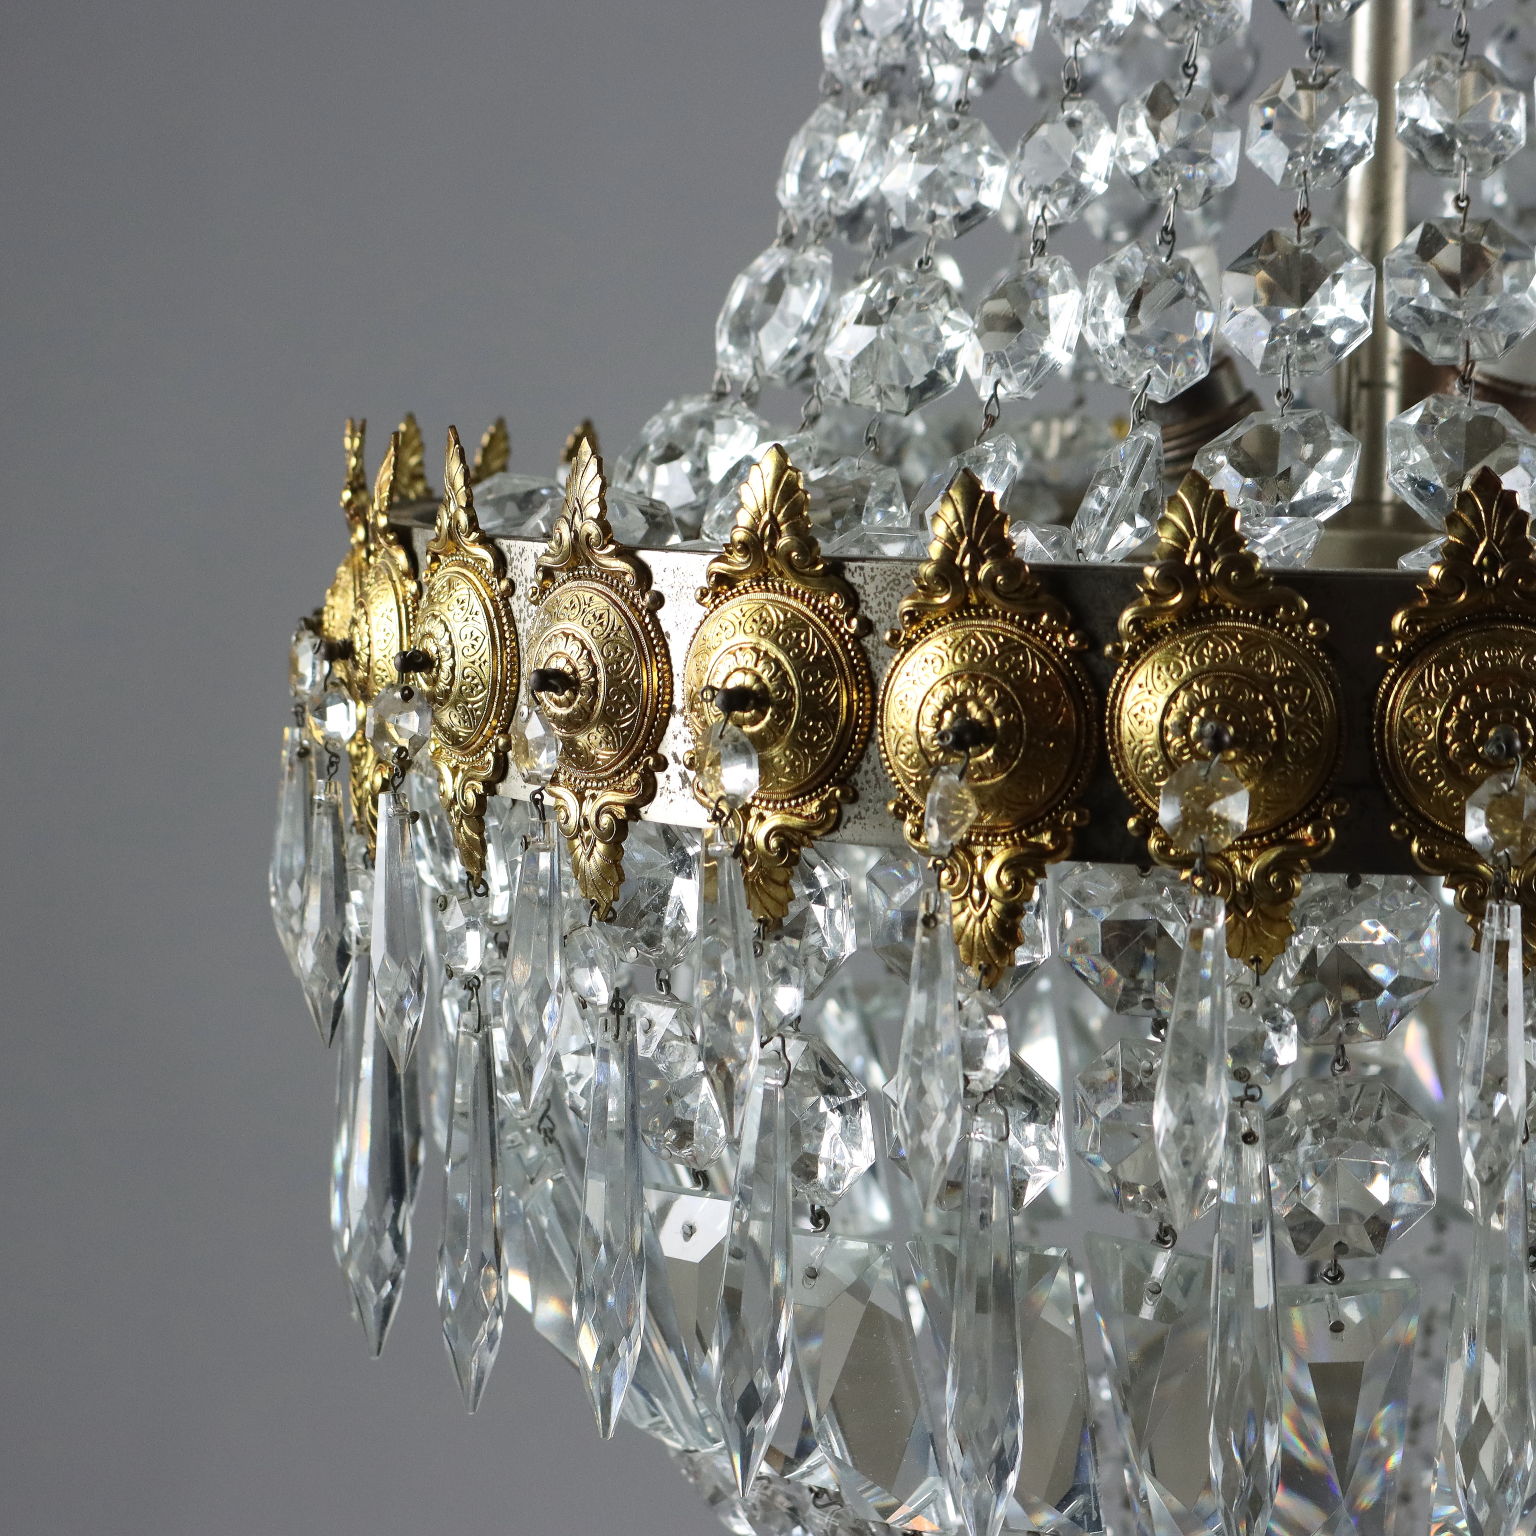 Oval Shaped Crystal and Brass Chandelier, Italy, 1940 for sale at Pamono